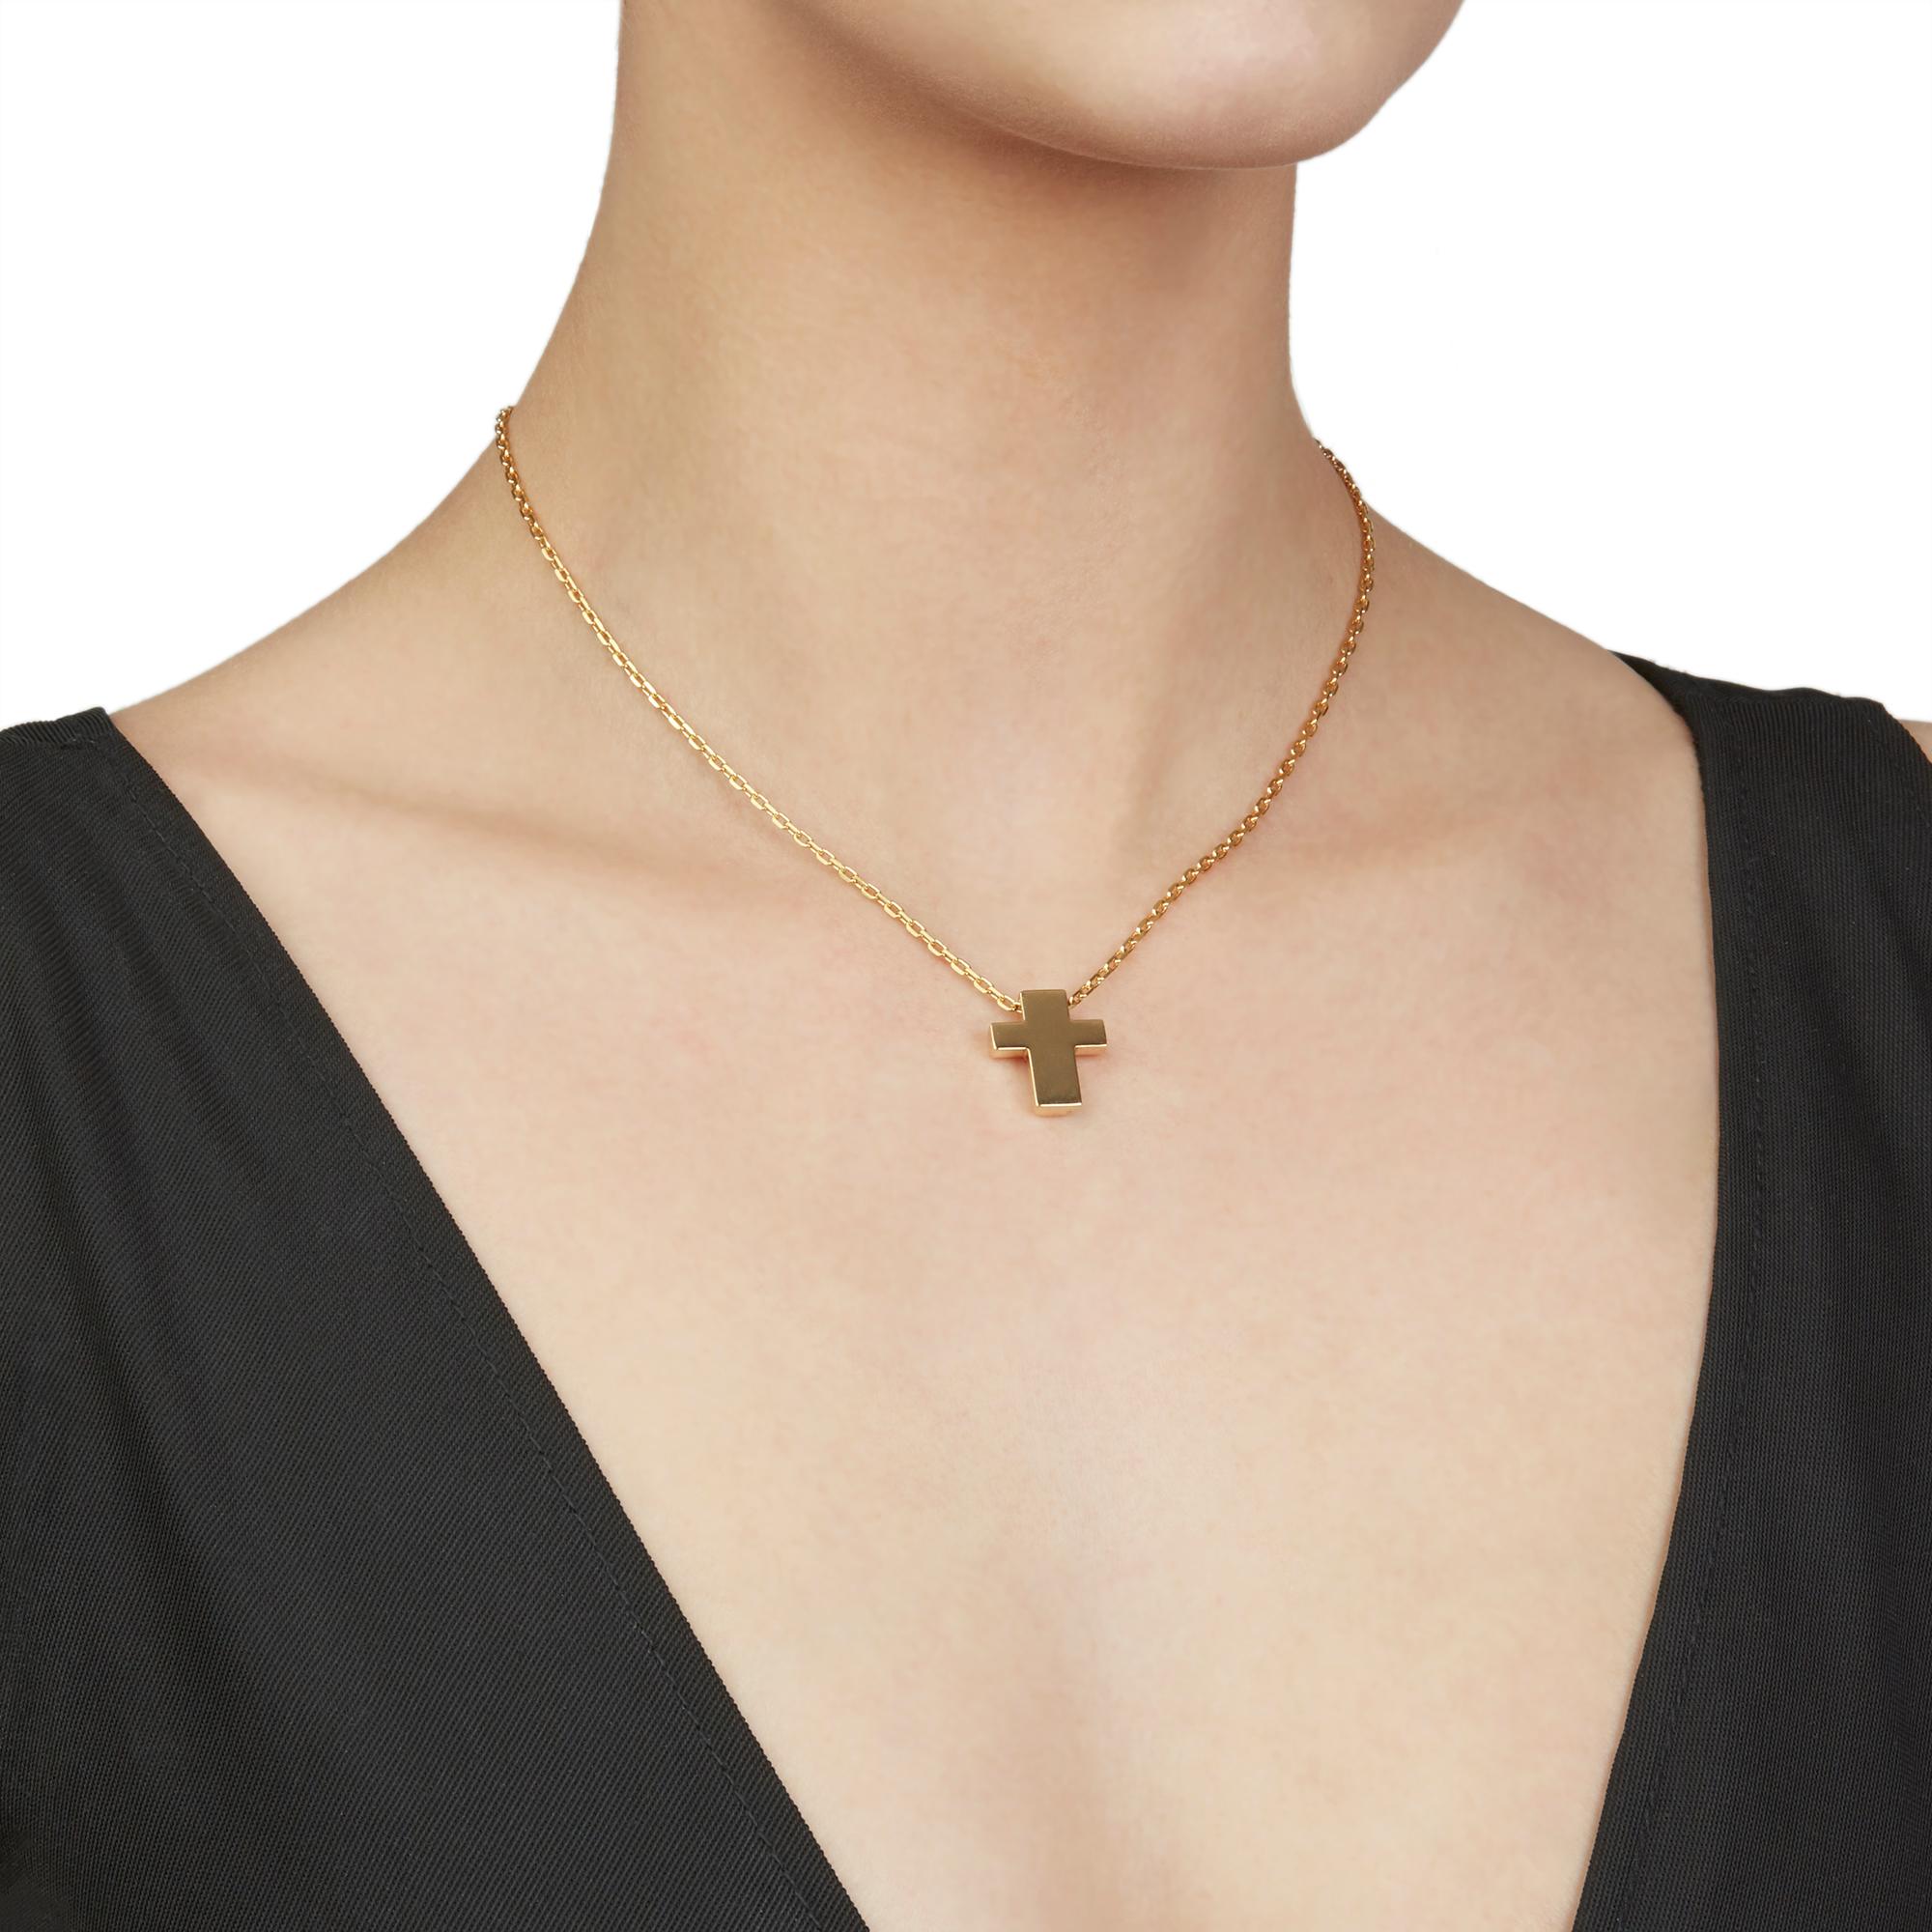 This Necklace by Asprey features a cross design pendant with a round link chain, made in 18k Yellow Gold. The chain is 41cm and the pendant length is 1.7cm and the width is 1.5cm. The Necklace has a secure lobster clasp. Complete with Xupes